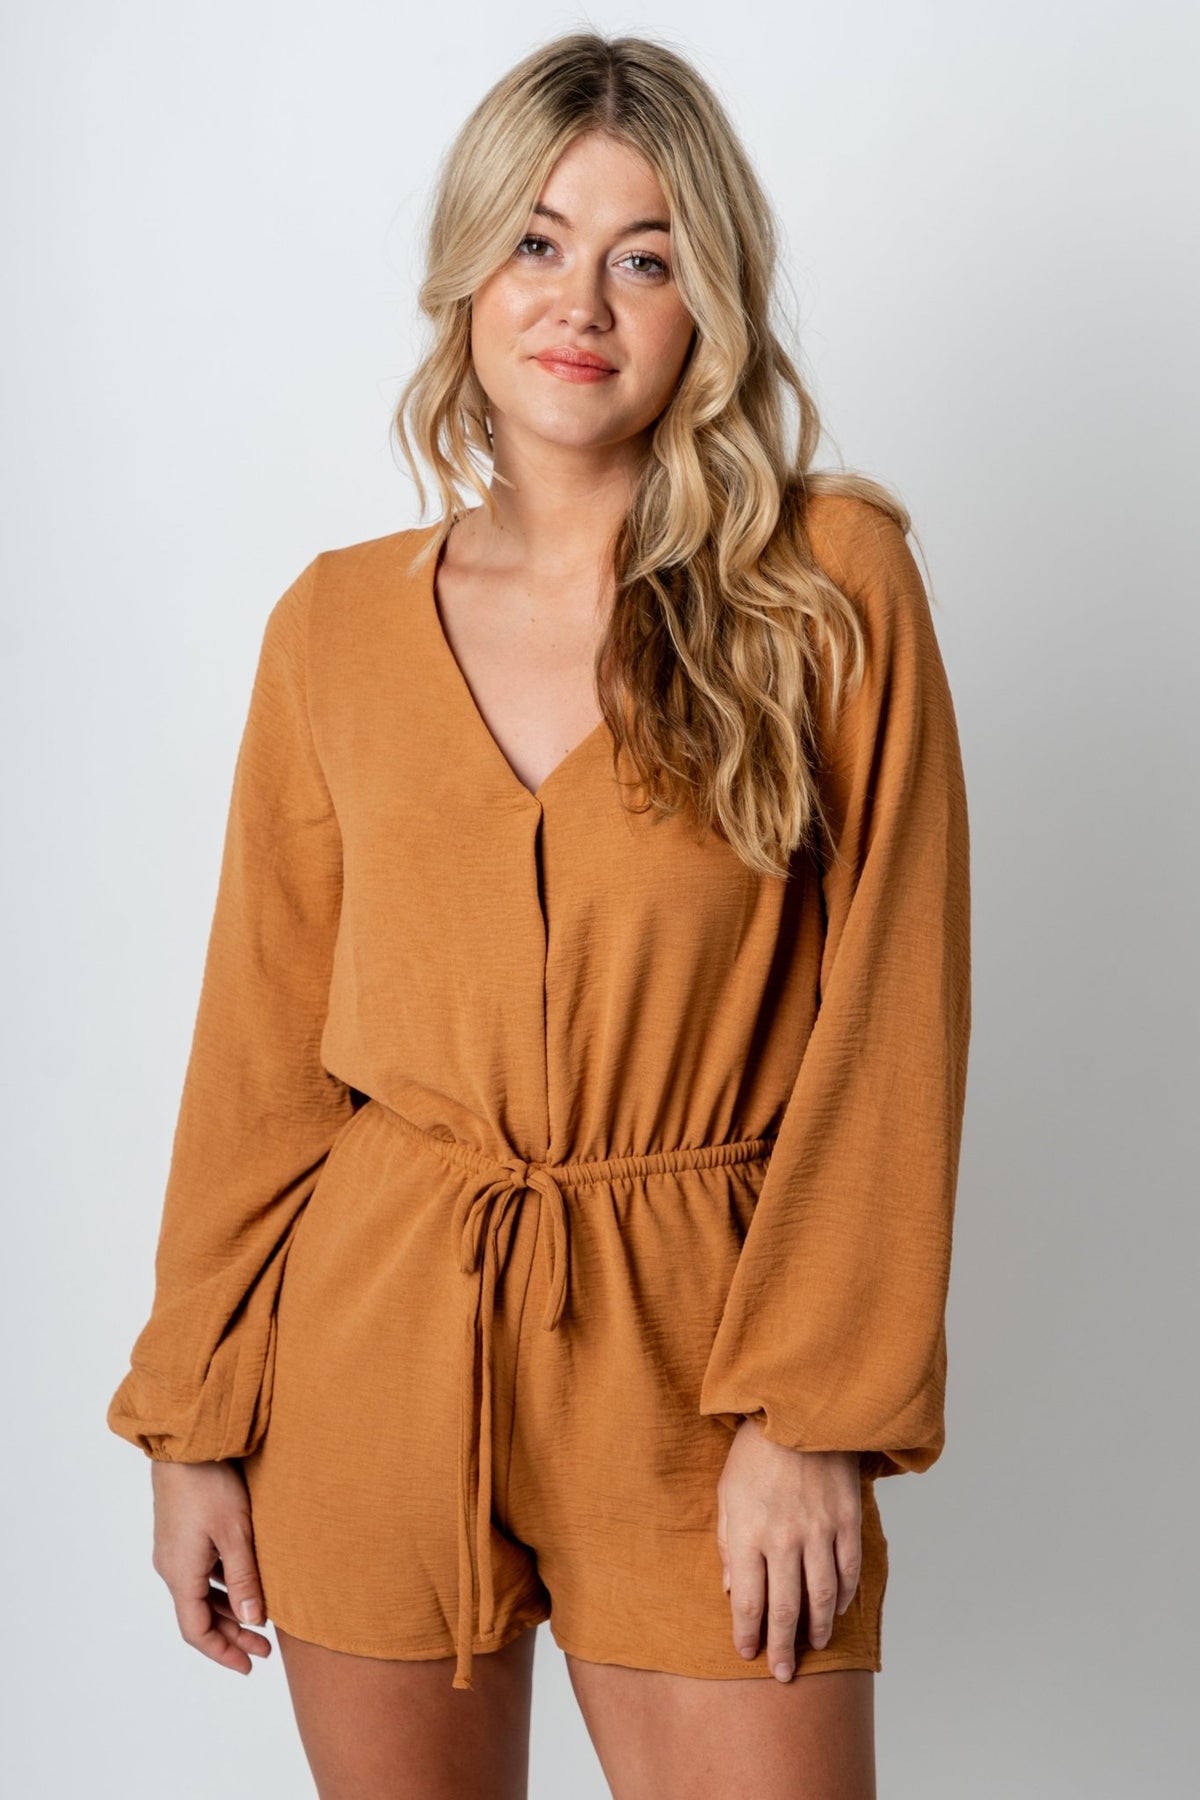 Tie waist long sleeve romper camel - Cute Romper - Trendy Rompers and Pantsuits at Lush Fashion Lounge Boutique in Oklahoma City